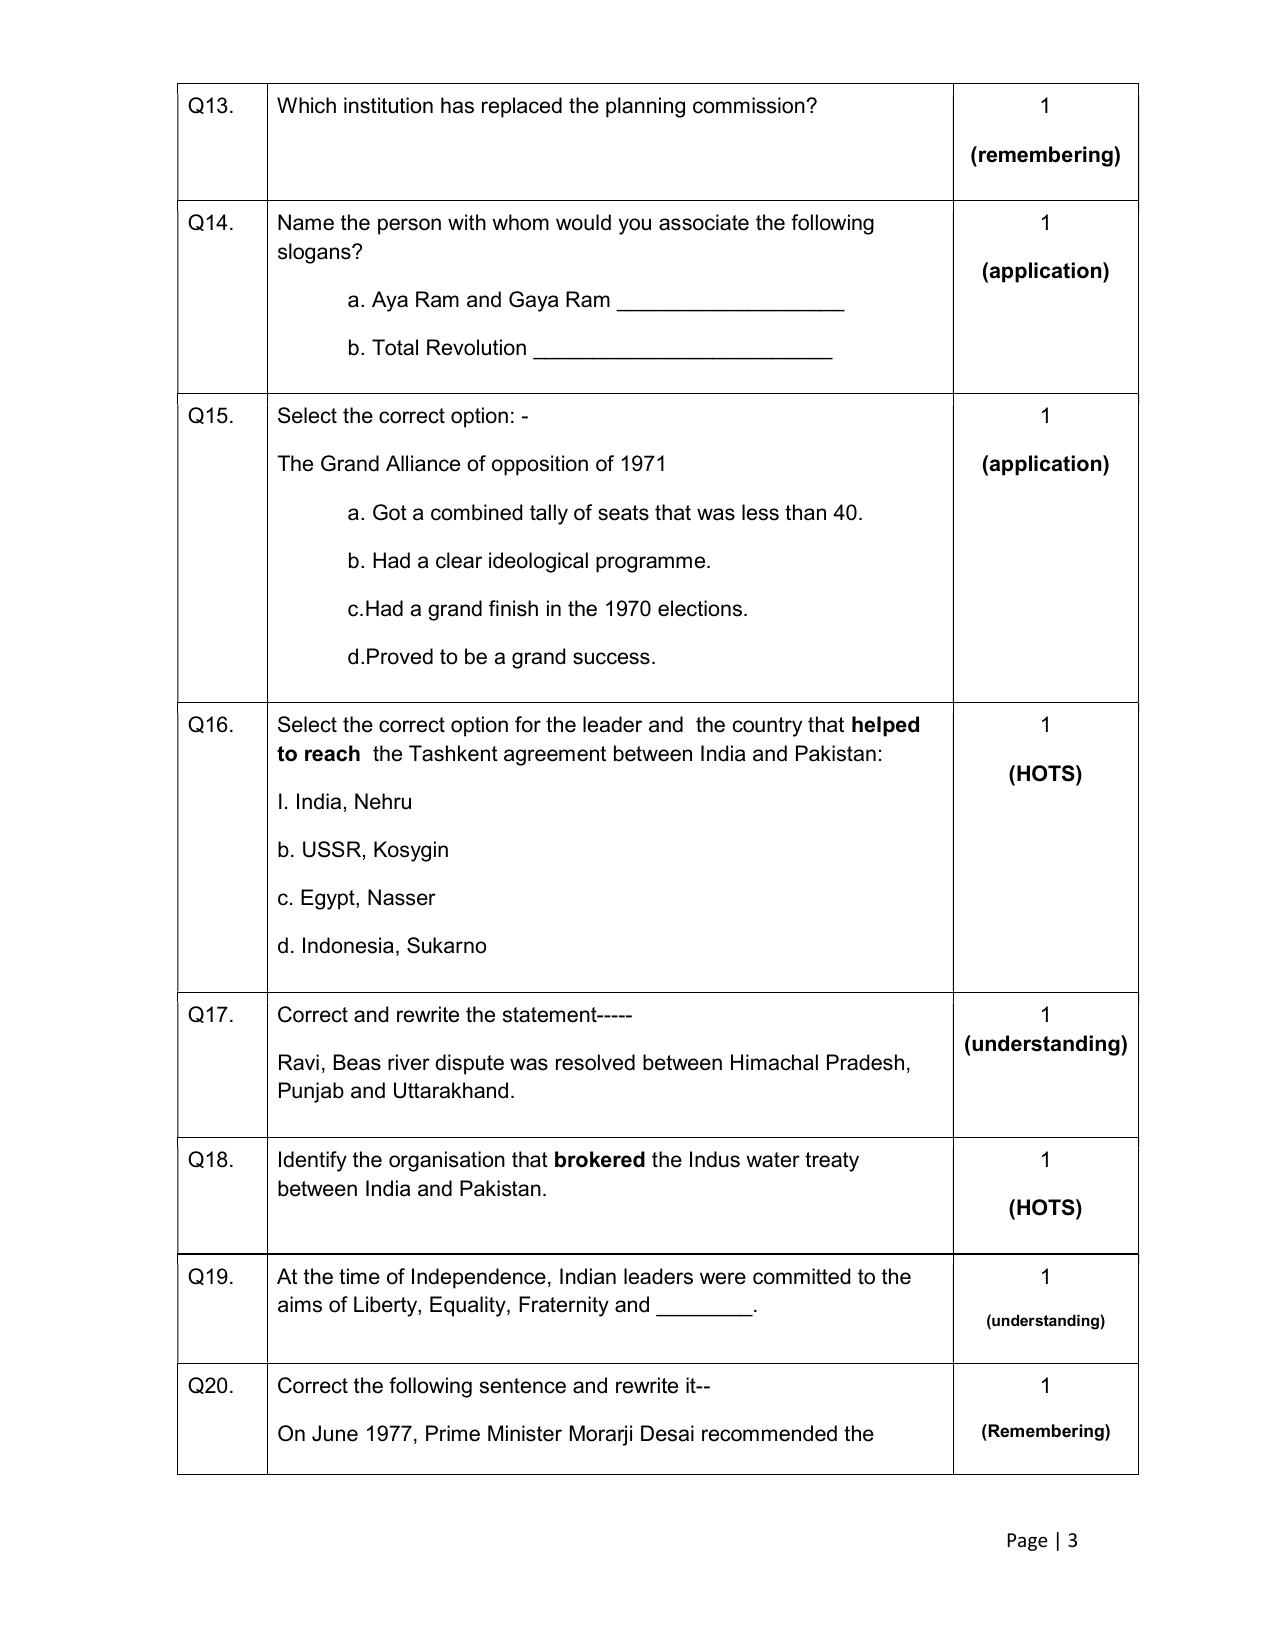 CBSE Class 12 Pol. Science -Sample Paper 2019-20 - Page 3